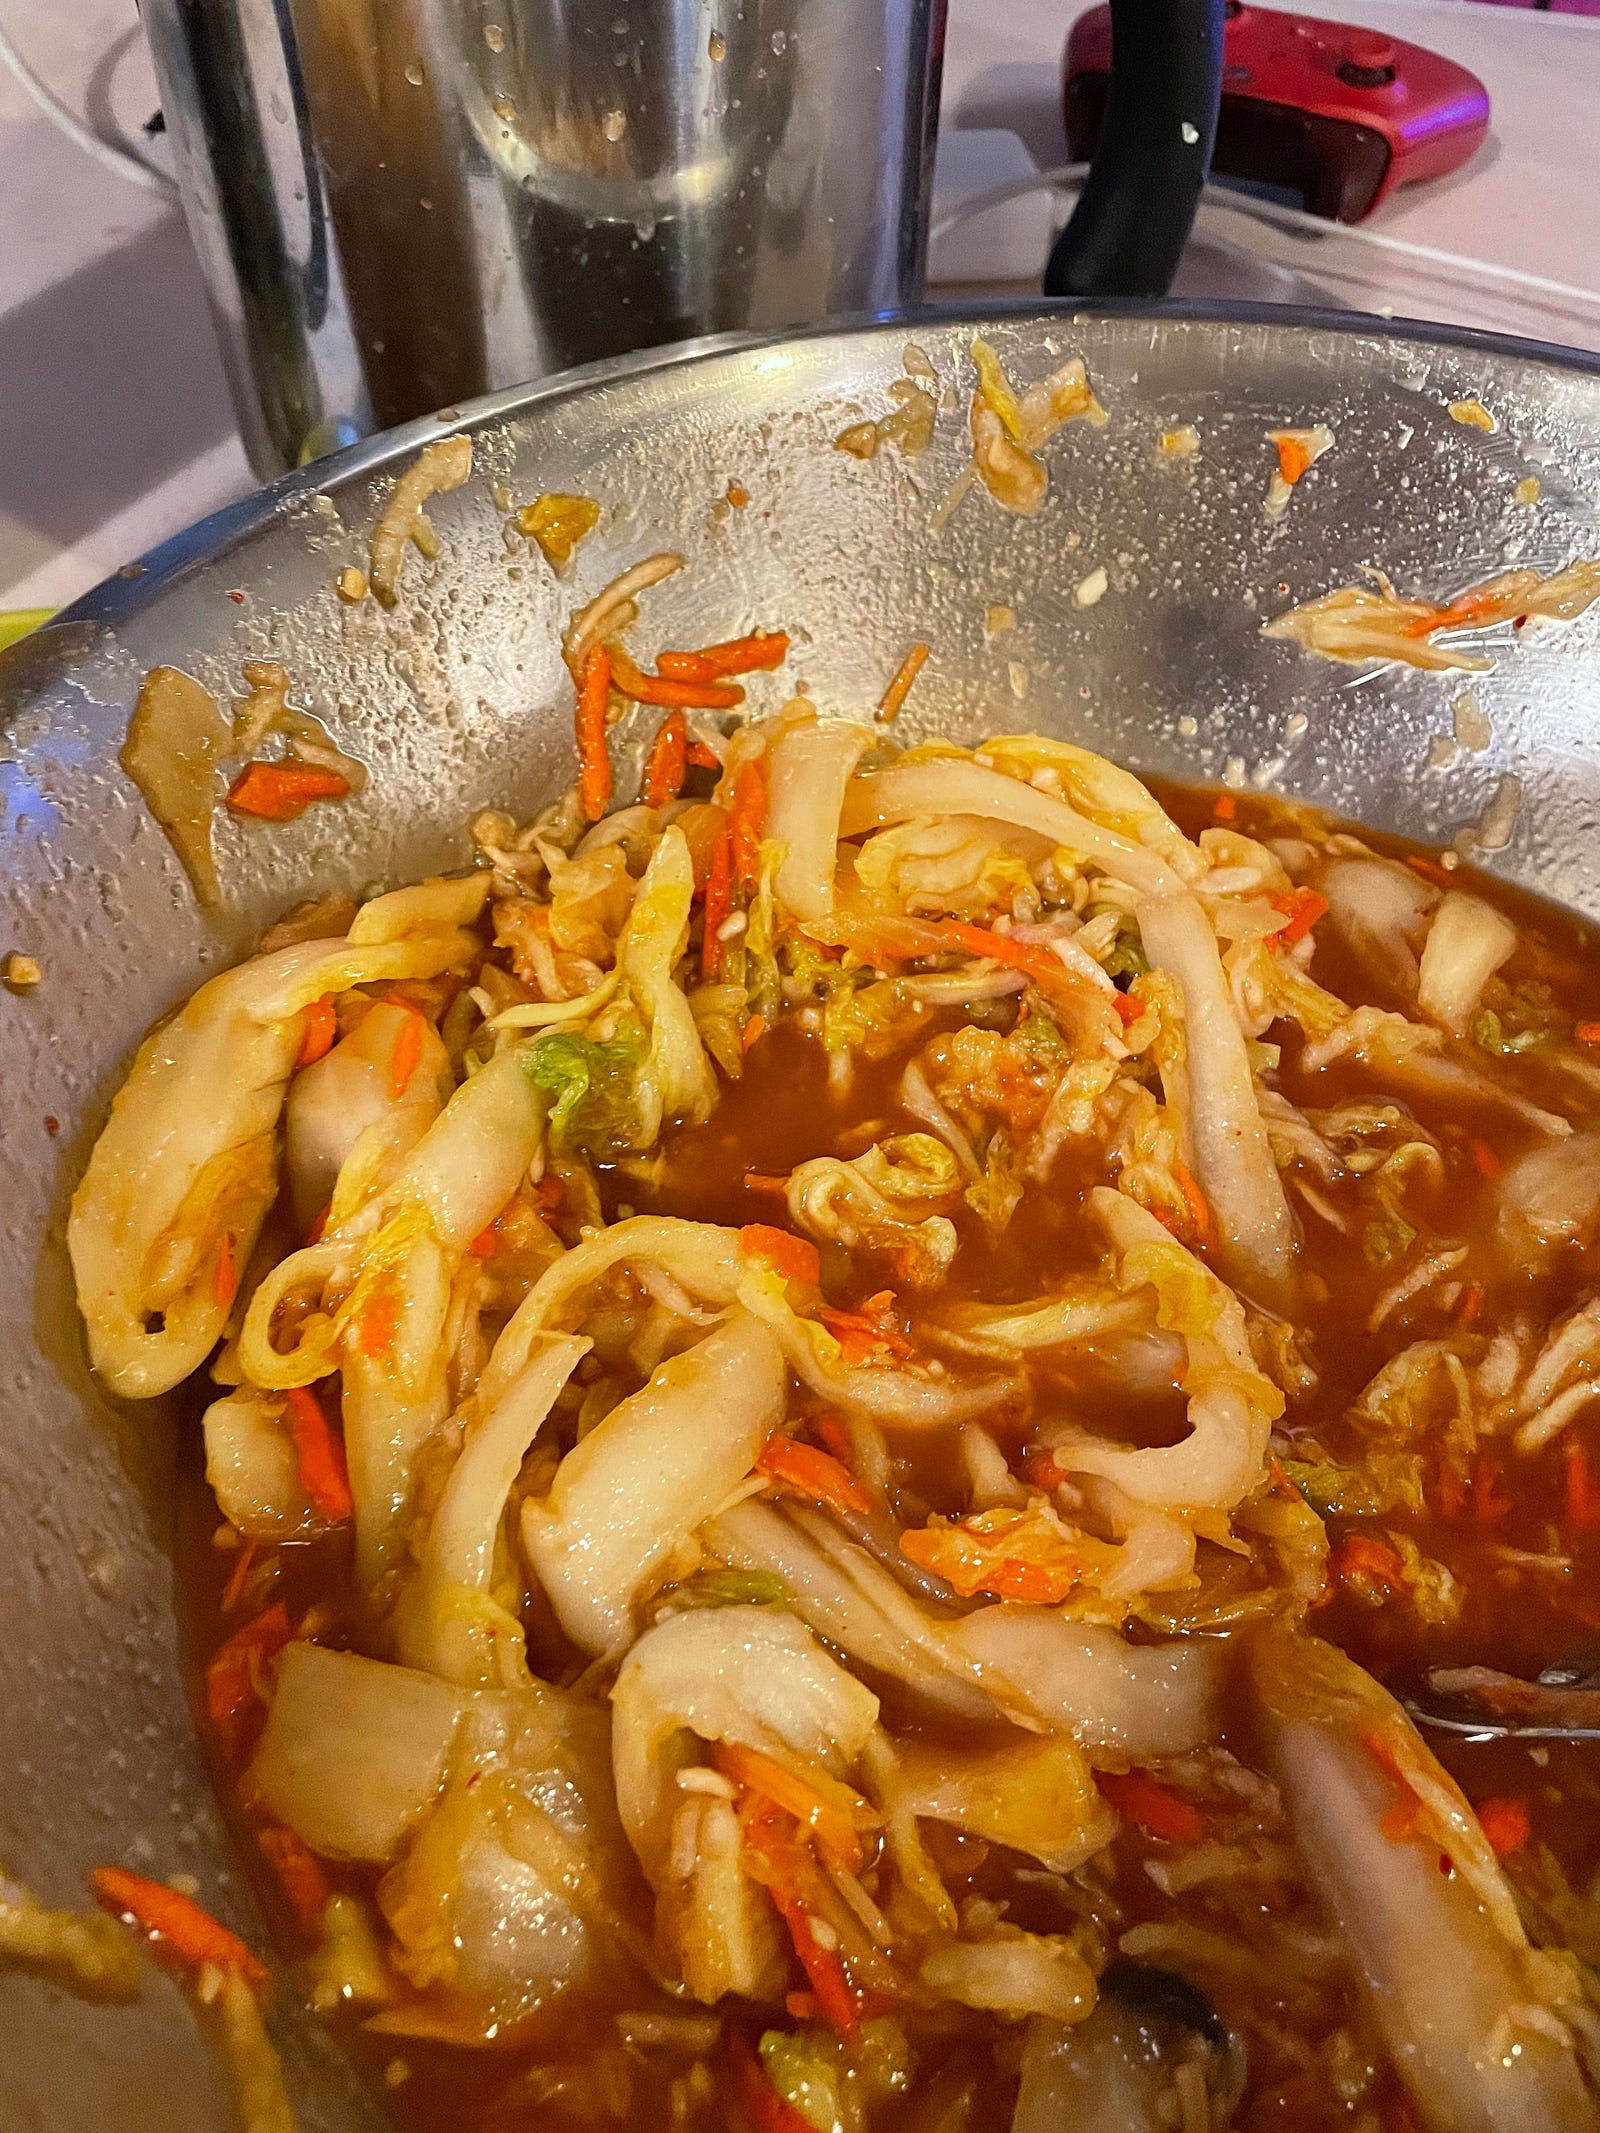 kimchi a pickled cabbage with root vegetables in a spicy red mainade filling half a large bowl.